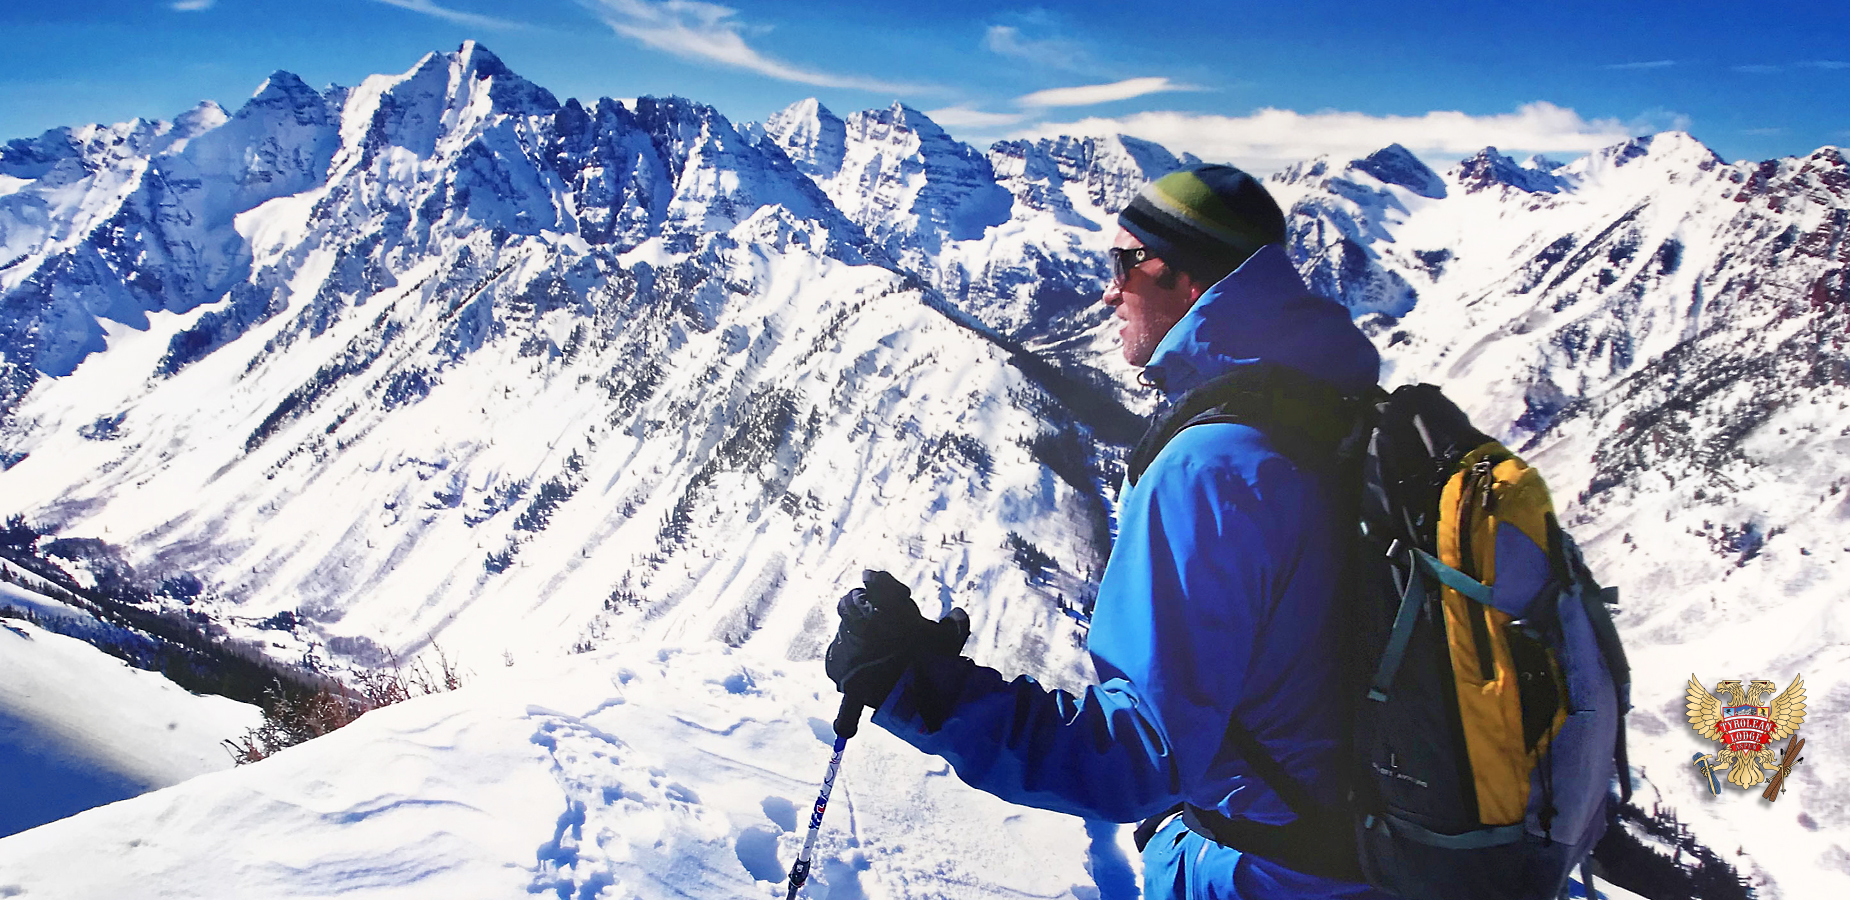 Pierre Willie scans the Elk Mountains for backcountry ski lines